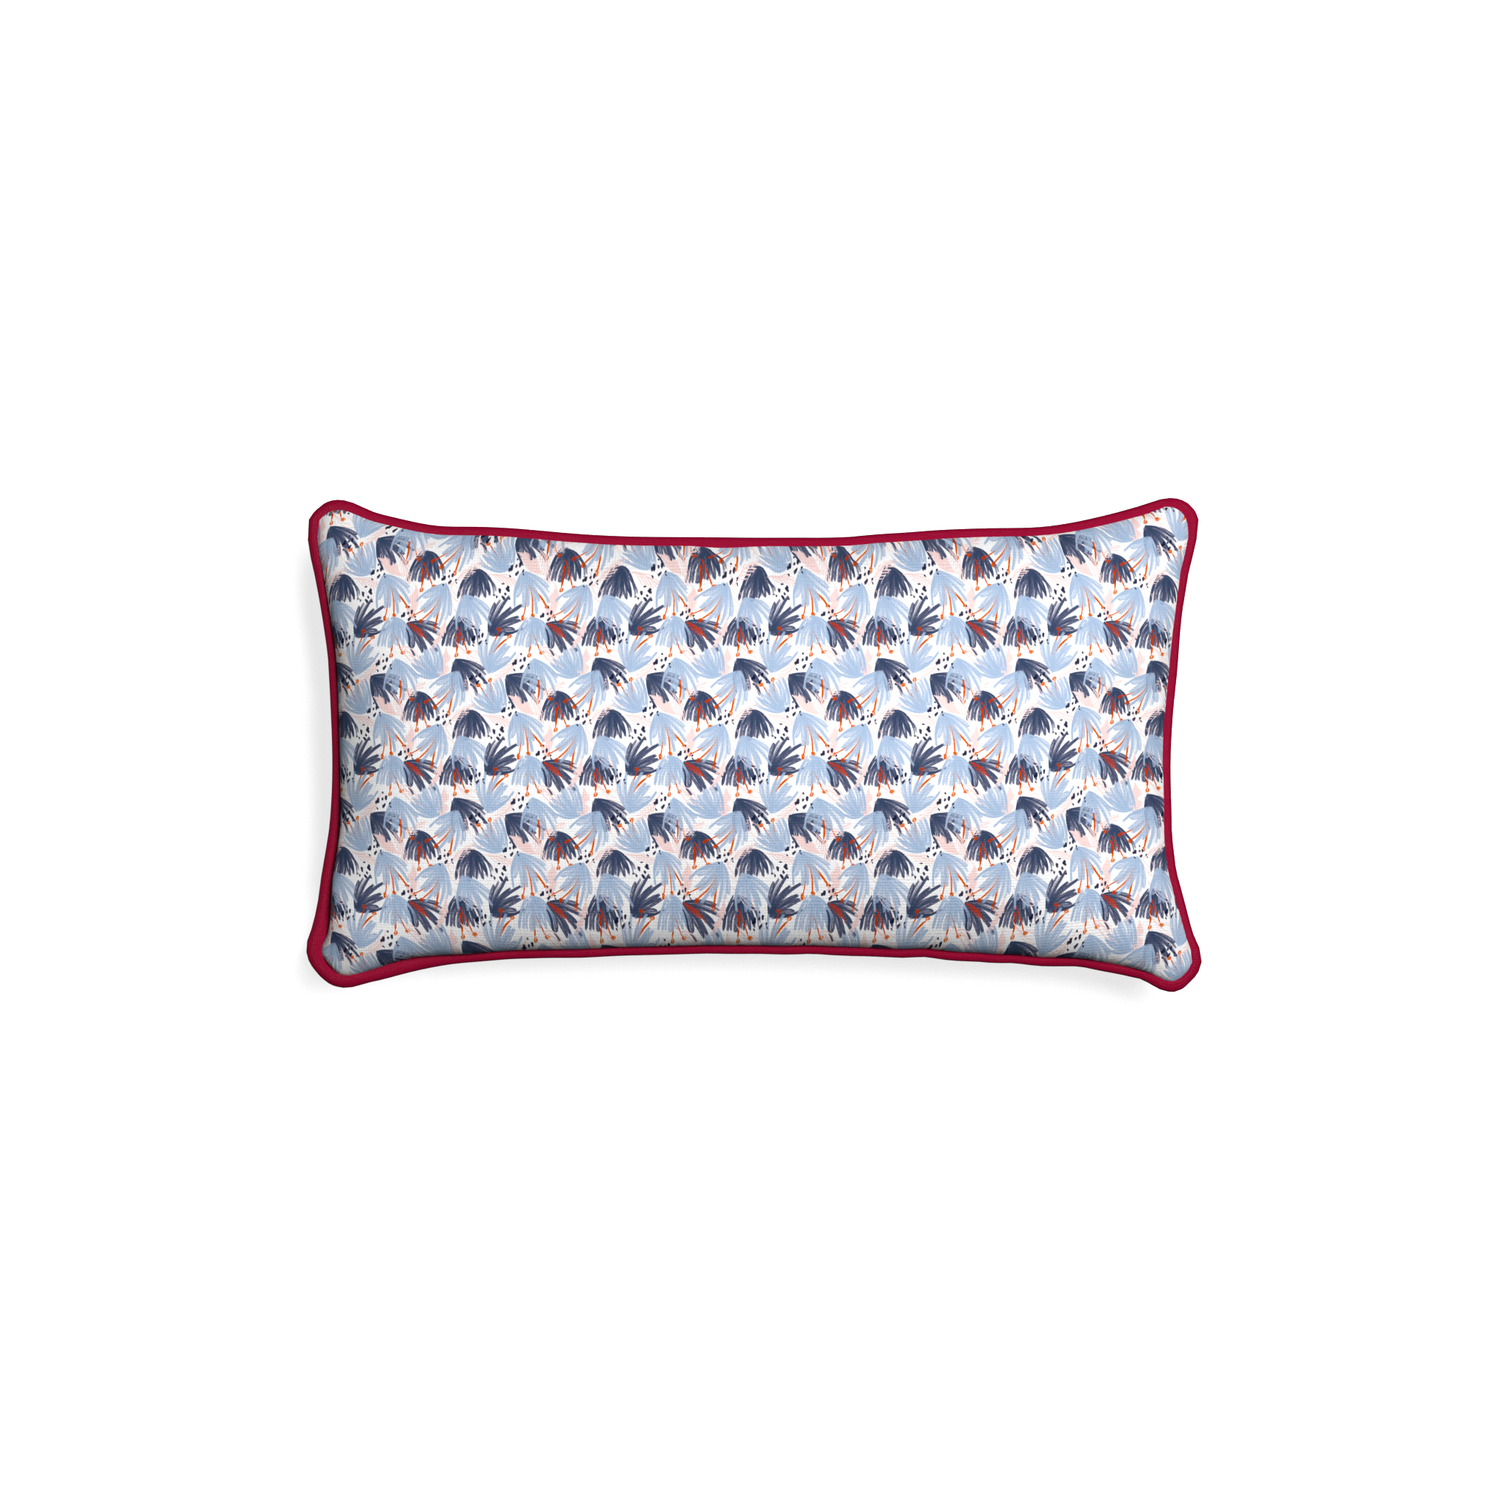 Petite-lumbar eden blue custom red and bluepillow with raspberry piping on white background